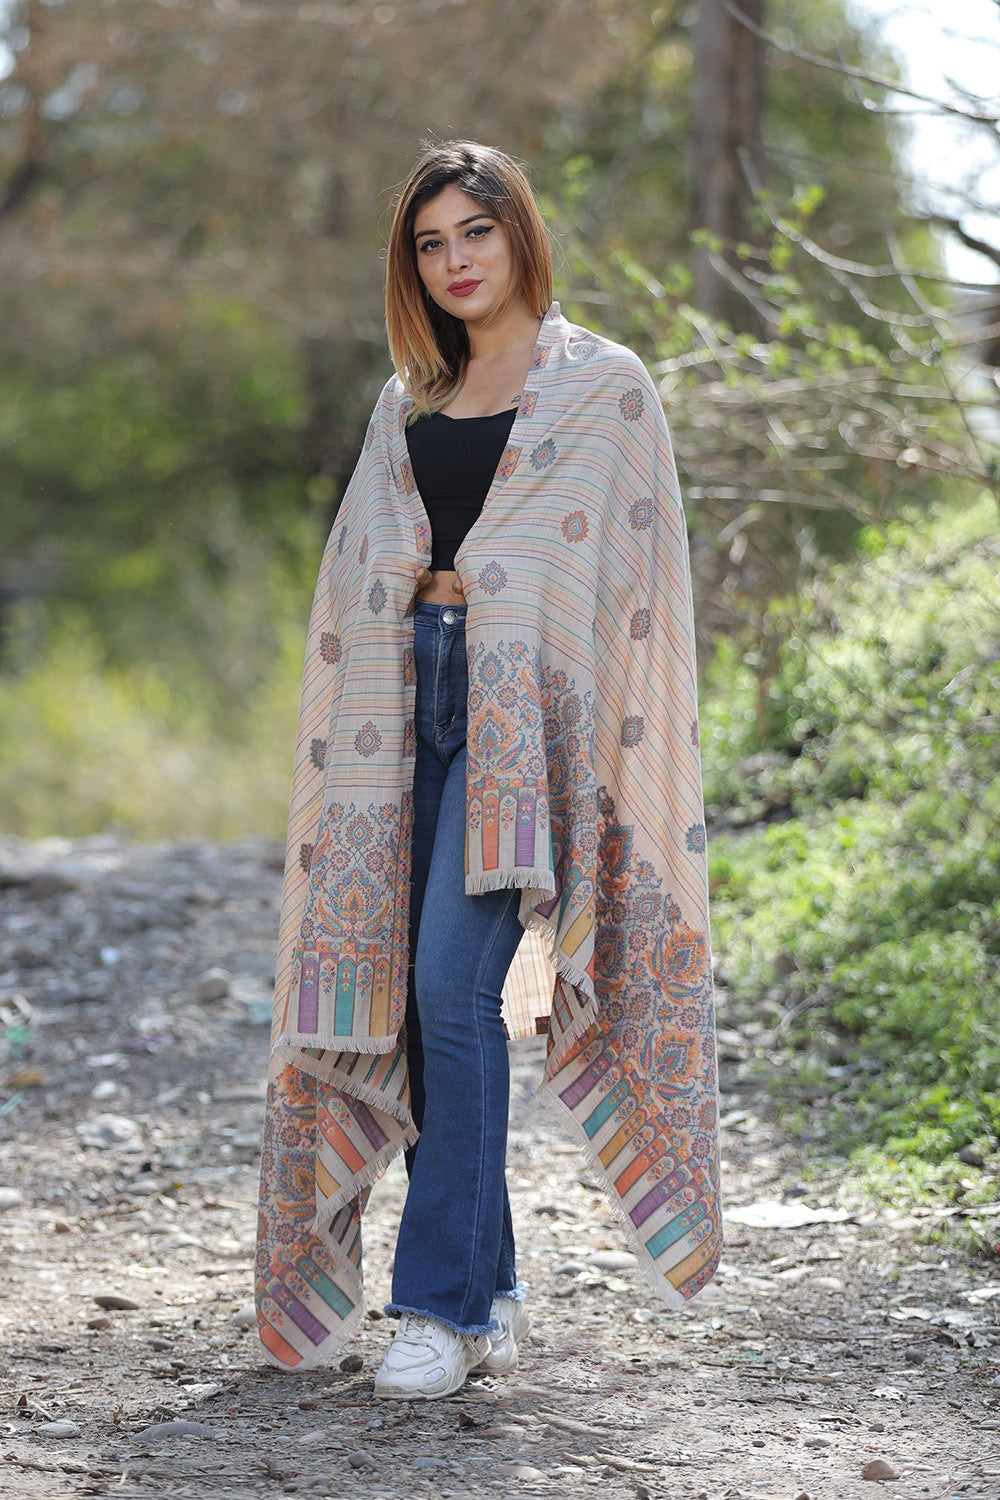 Fawn Colour Shawl With Flower Pattern Style Bold And Dense